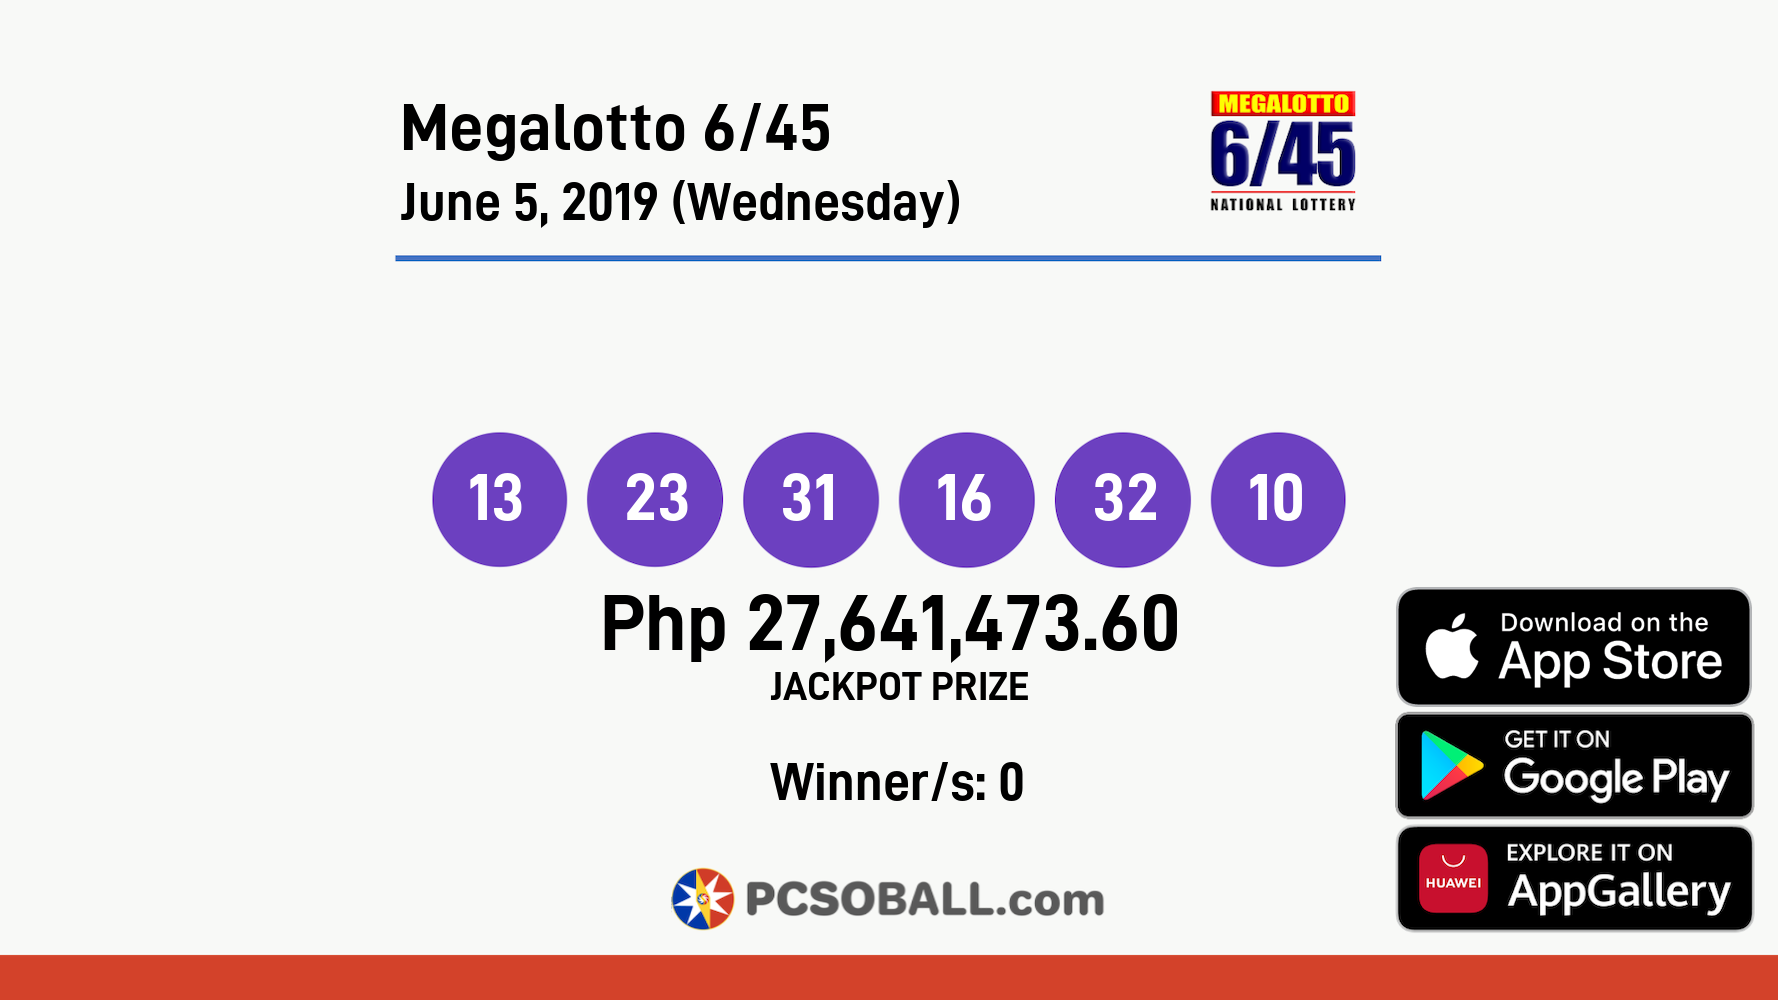 Megalotto 6/45 June 5, 2019 (Wednesday) Result